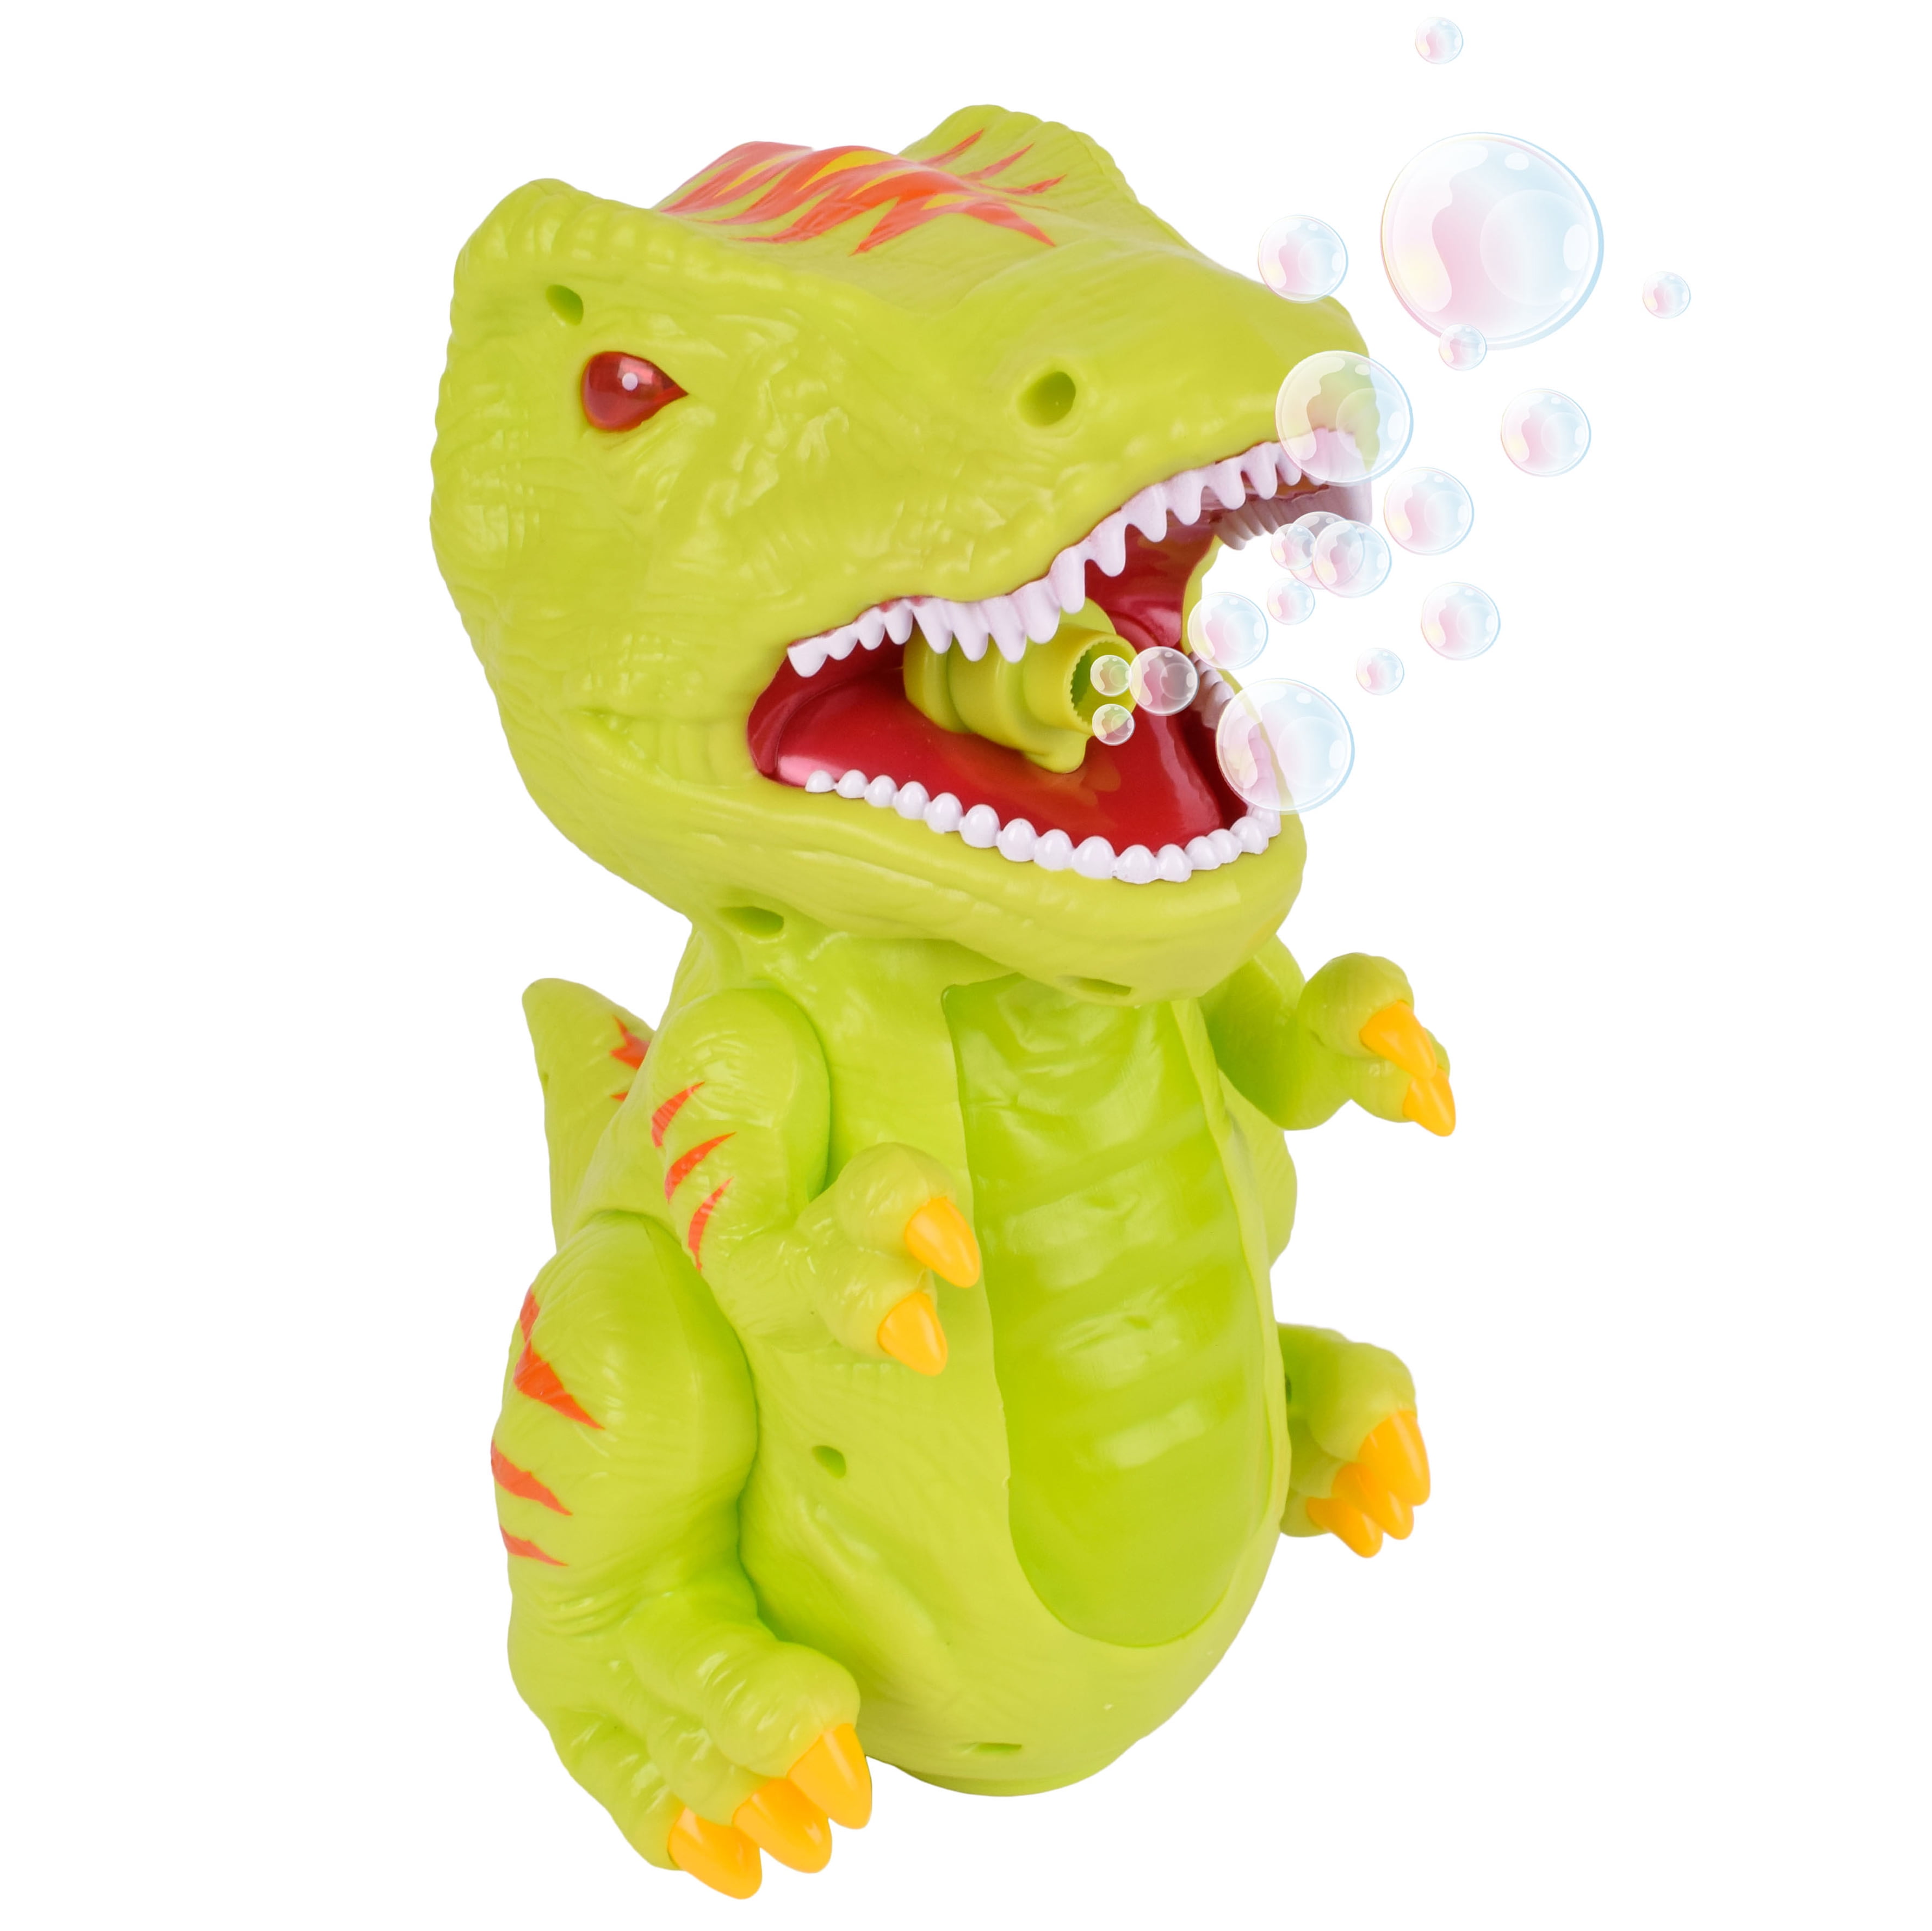 Play Day Bump N Go Bubble Blowing Dino with Lights  Sounds and Movement  Includes 4oz Solution $2.99